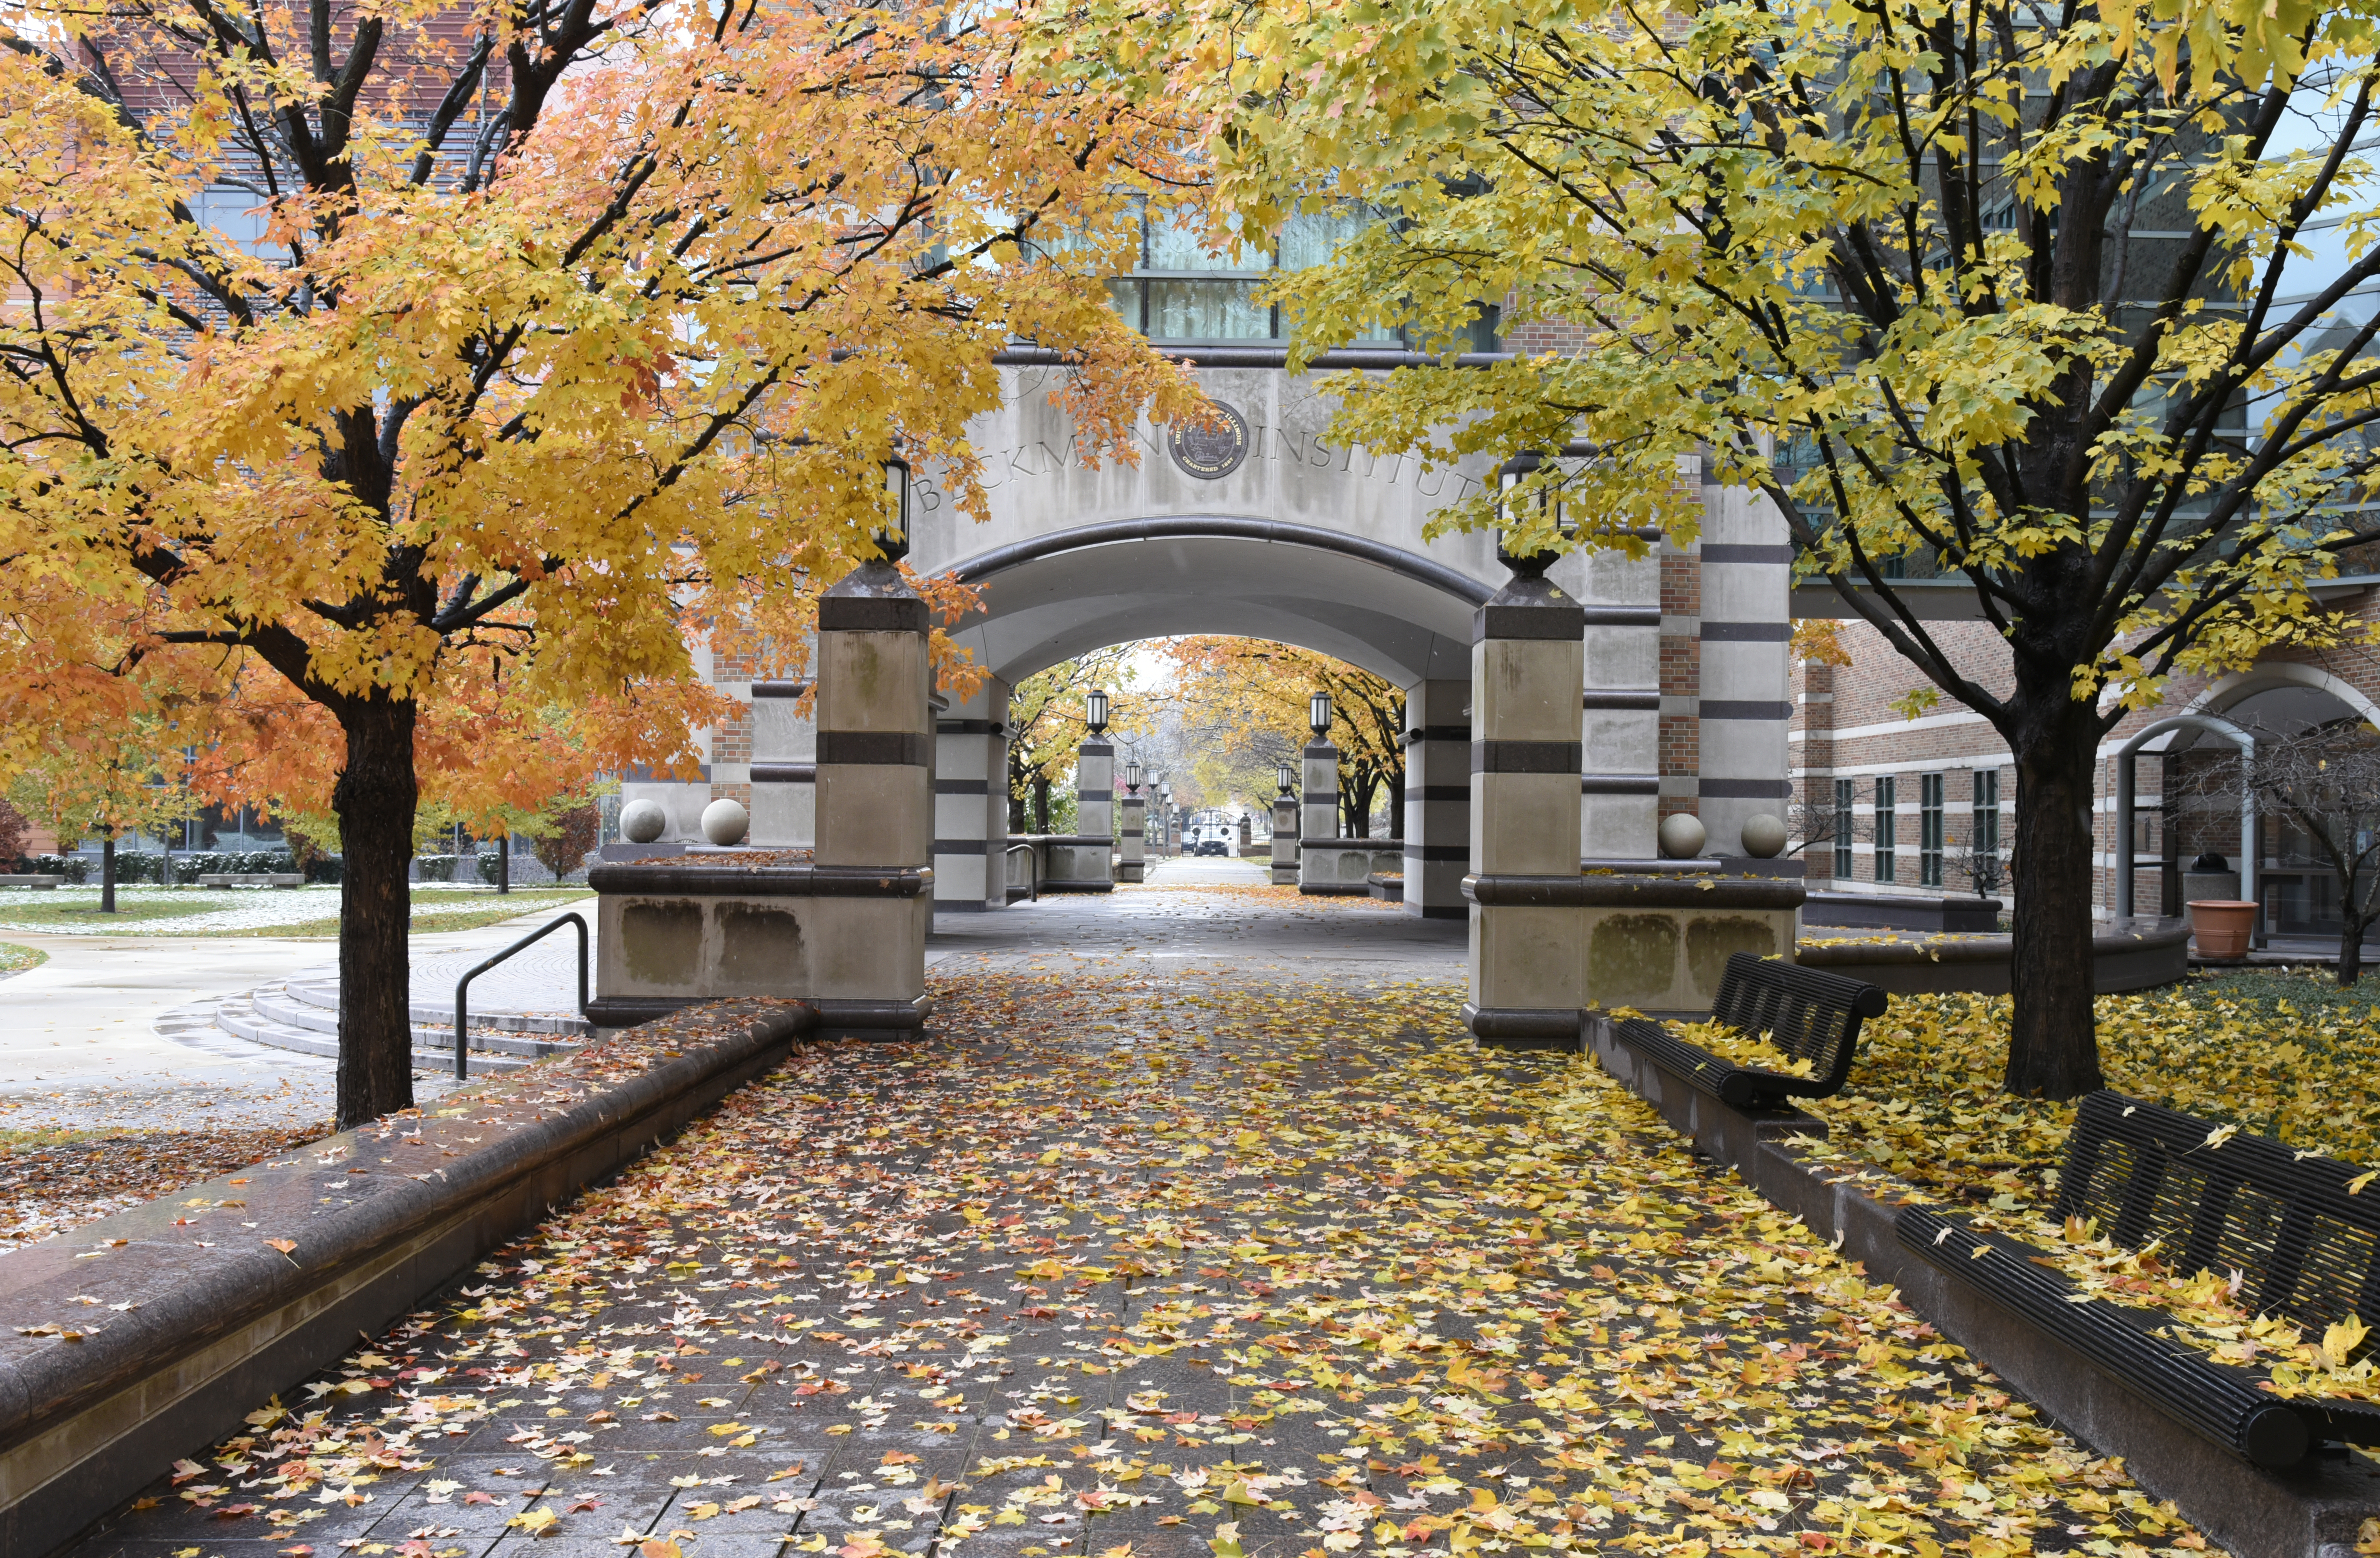 Beckman's rotunda entrance is carpeted in fall leaves